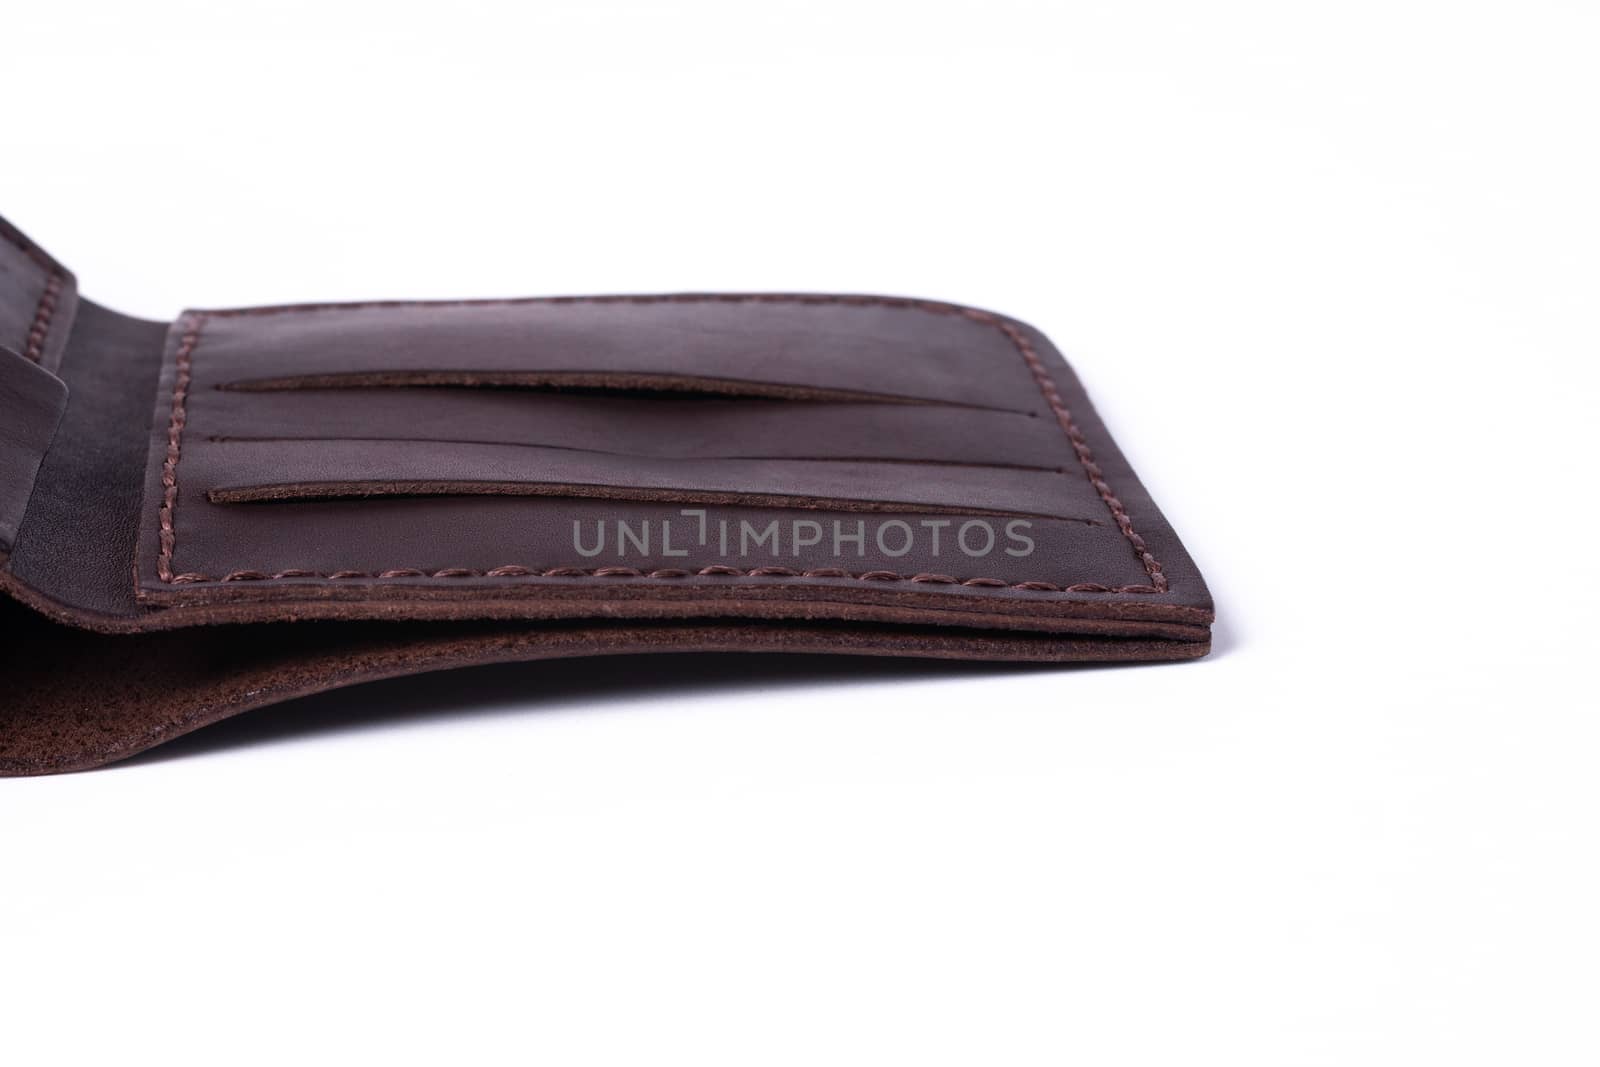 A part of brown handmade leather man wallet isolated on white background. Wallet is open. Stock photo of luxury businessman accessories.